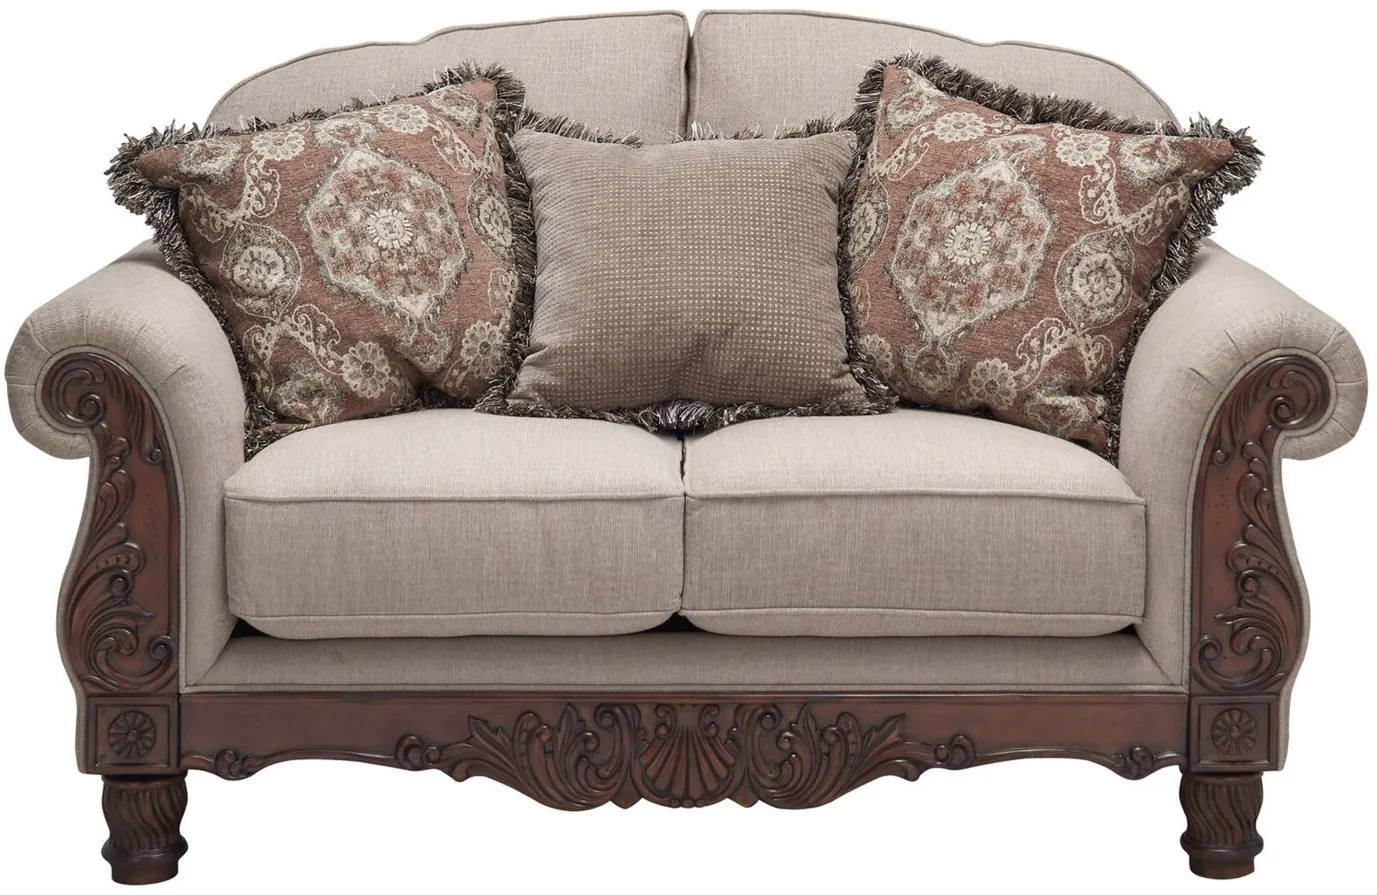 Palazzo Loveseat in Exploit Sand by Aria Designs